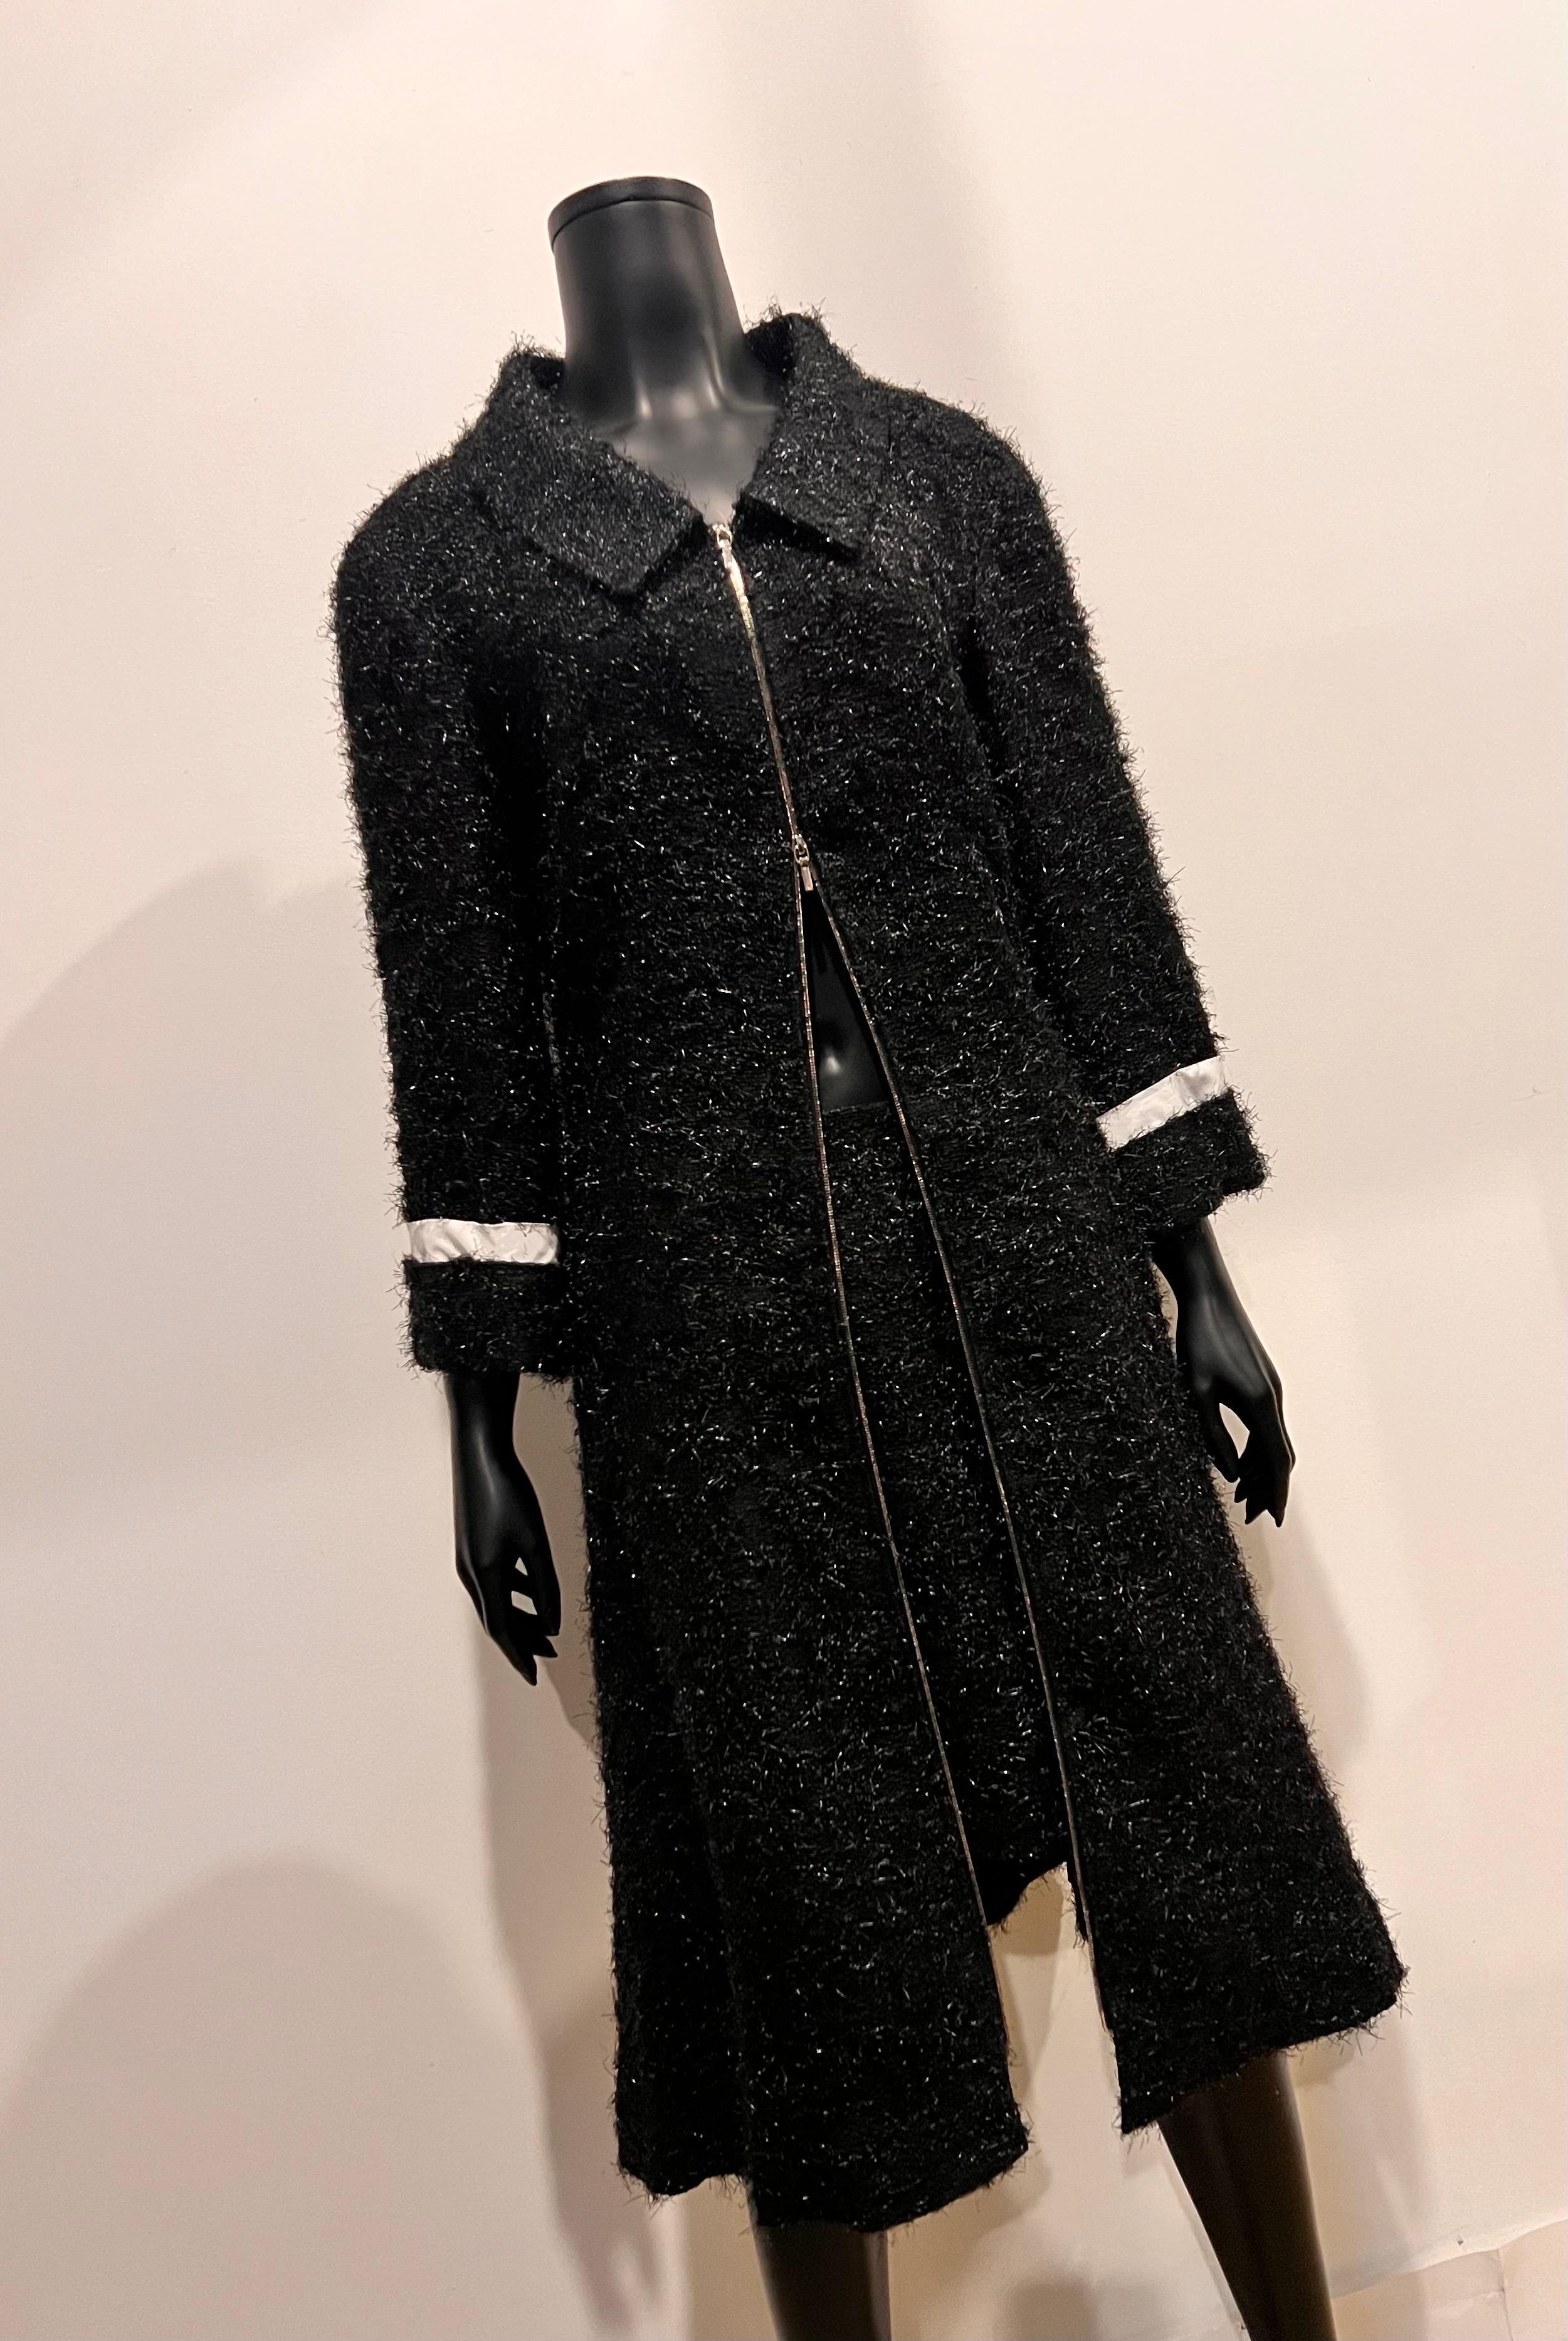 Chanel 2000’s Coat and Skirt set with zip detail In Excellent Condition For Sale In COLLINGWOOD, AU